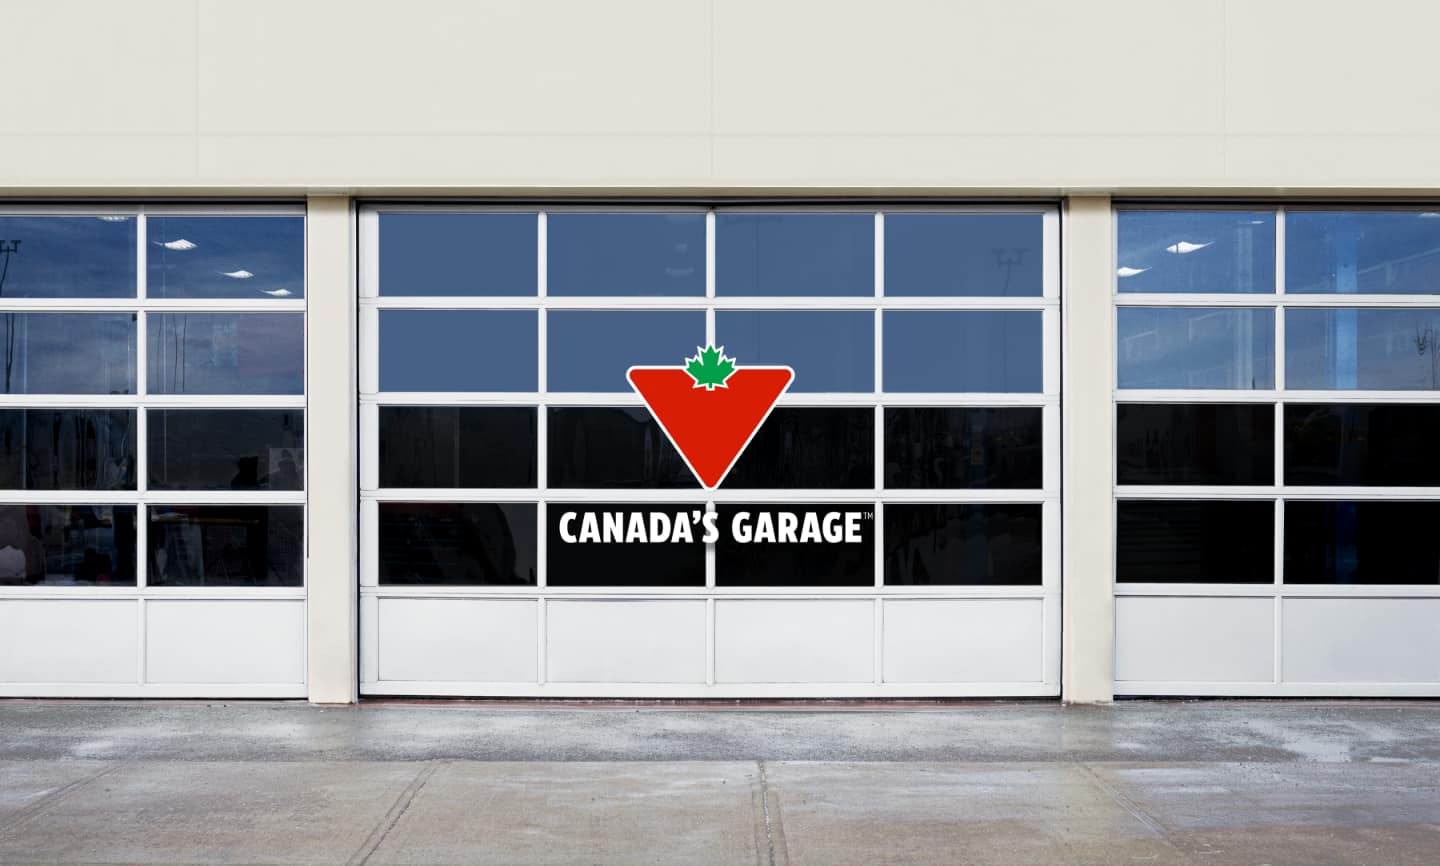 The “Canada’s Garage” logo in front of a row of service-bay doors.